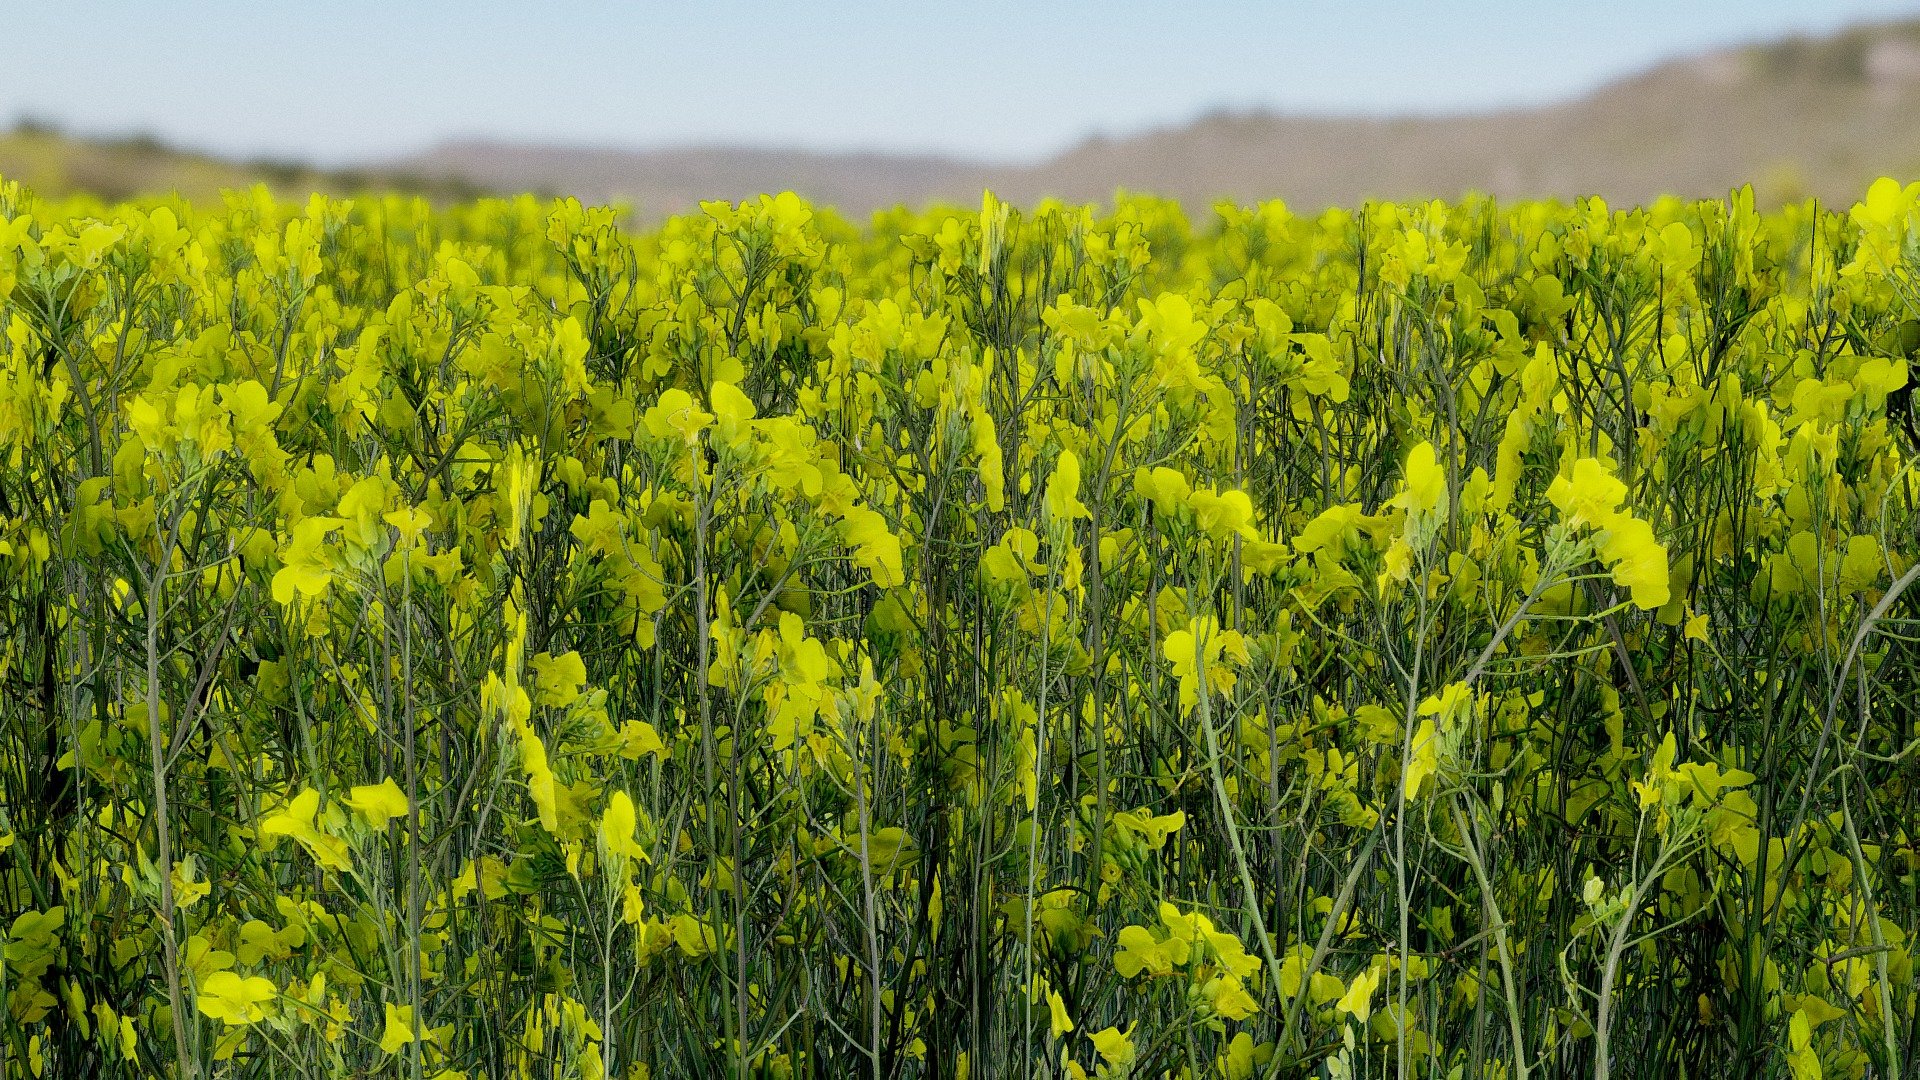 Simple 3d model of some rapeseed created in maya for use on large scenes in ue4.

Can be seen in UE4 with pivot painter applied here along with some more detailed rapeseed to be used in closeups.

https://www.youtube.com/watch?v=FTMivJ7dCaQ - rapeseed - 3D model by studio lab (@leonlabyk) 3d model